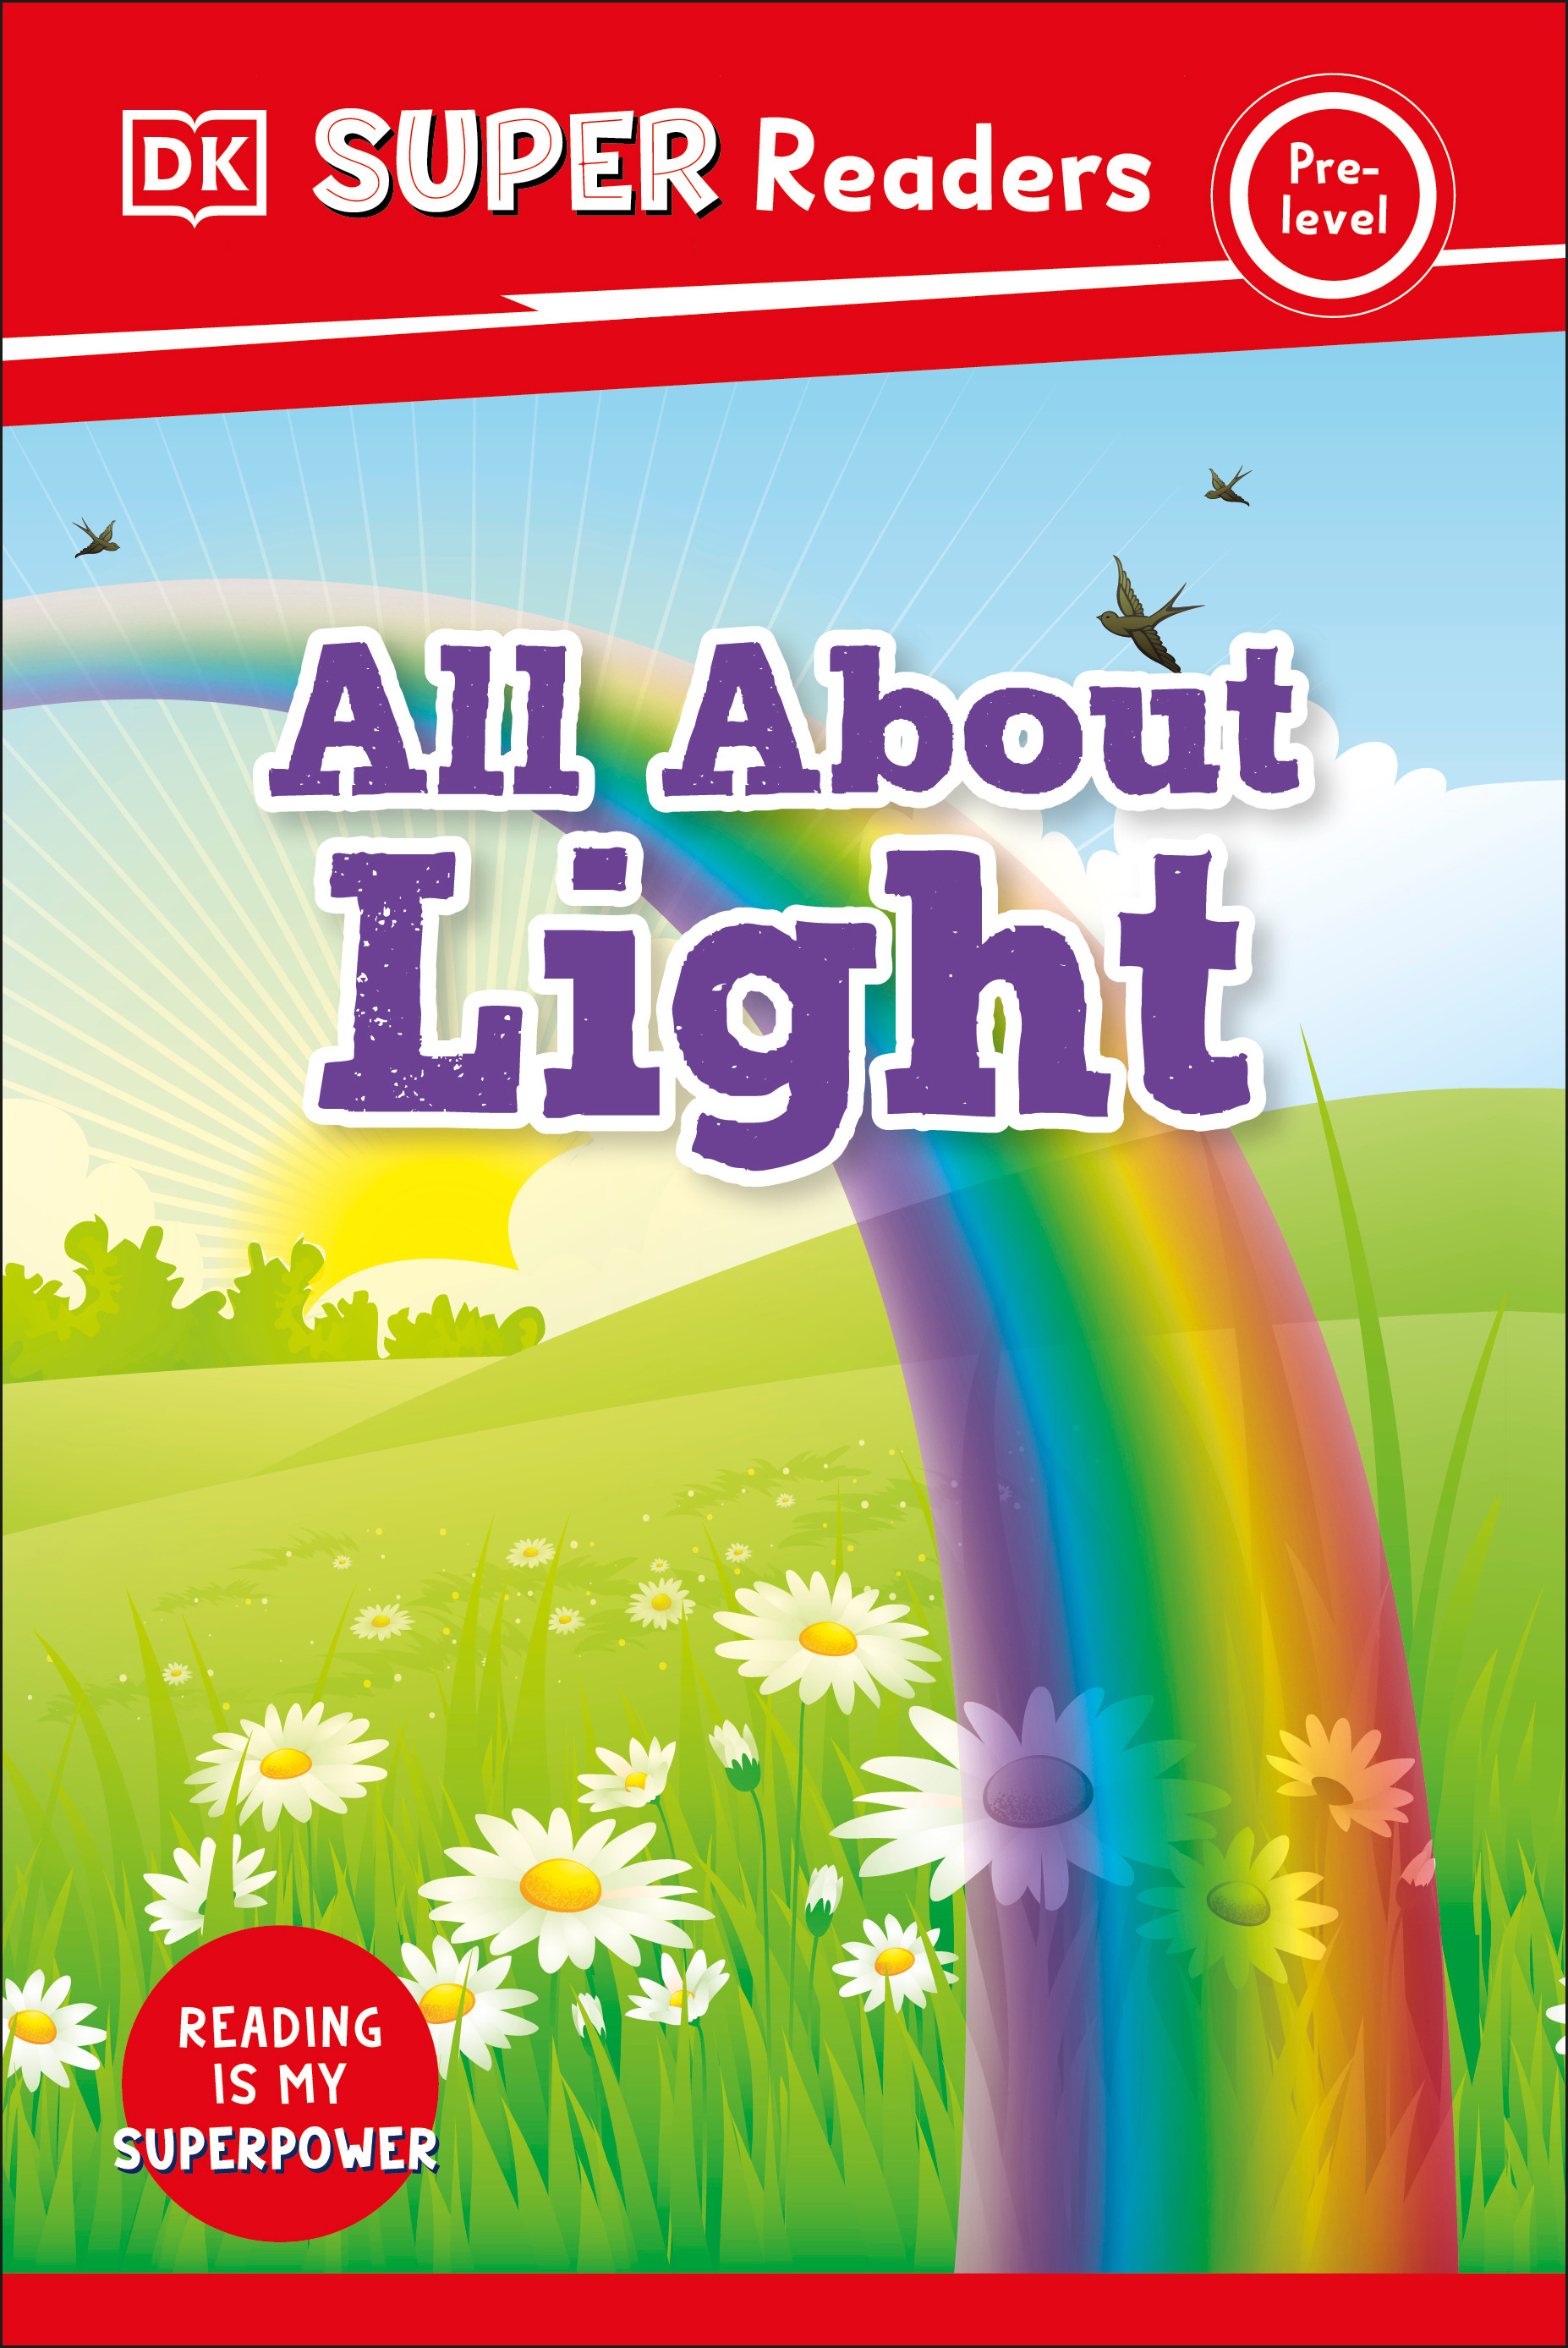 DK Super Readers Pre-Level All About Light | 